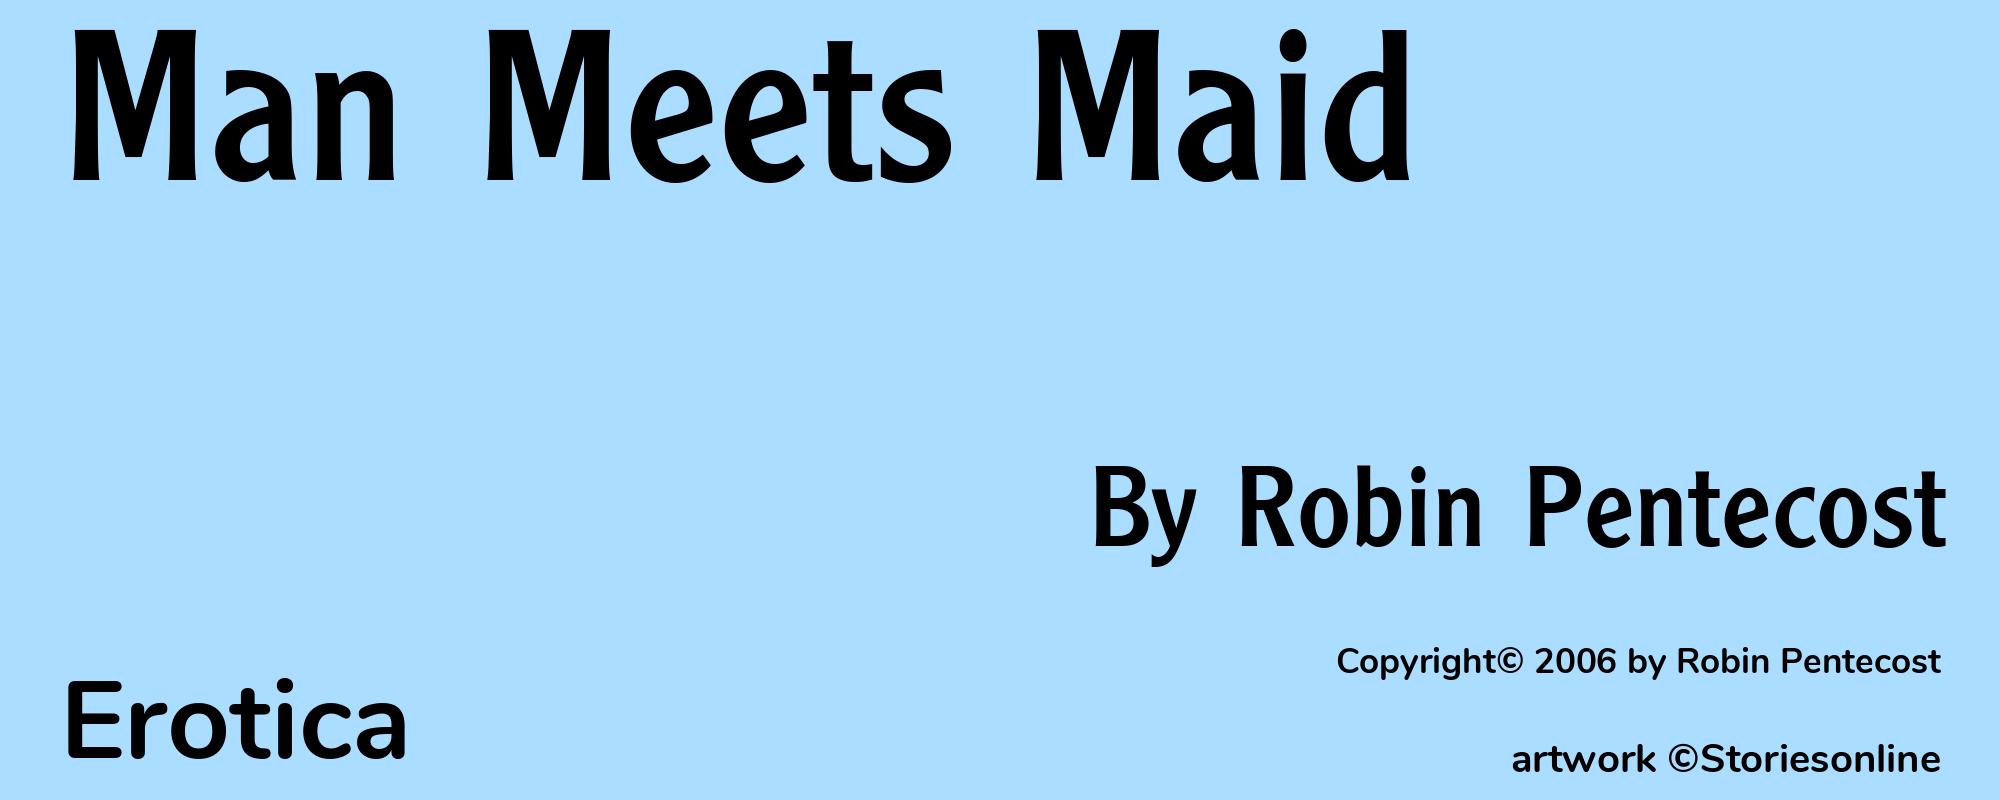 Man Meets Maid - Cover